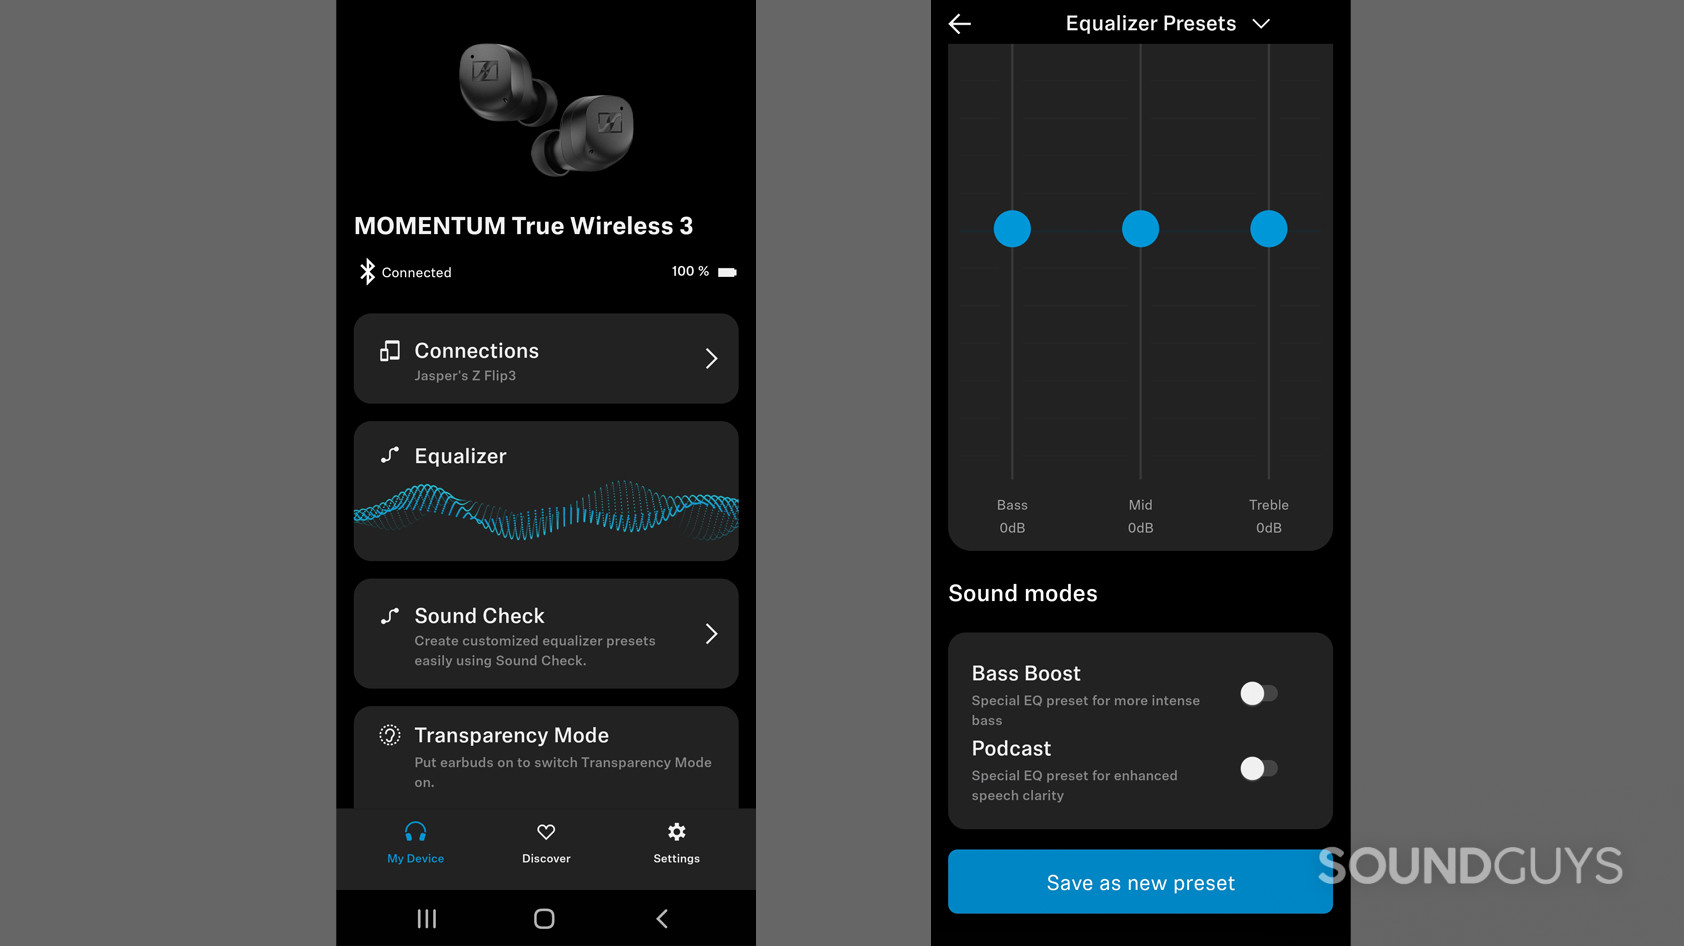 Image shows the main menu and equalizer in the Smart Control app with the Sennheiser MOMENTUM True Wireless 3.